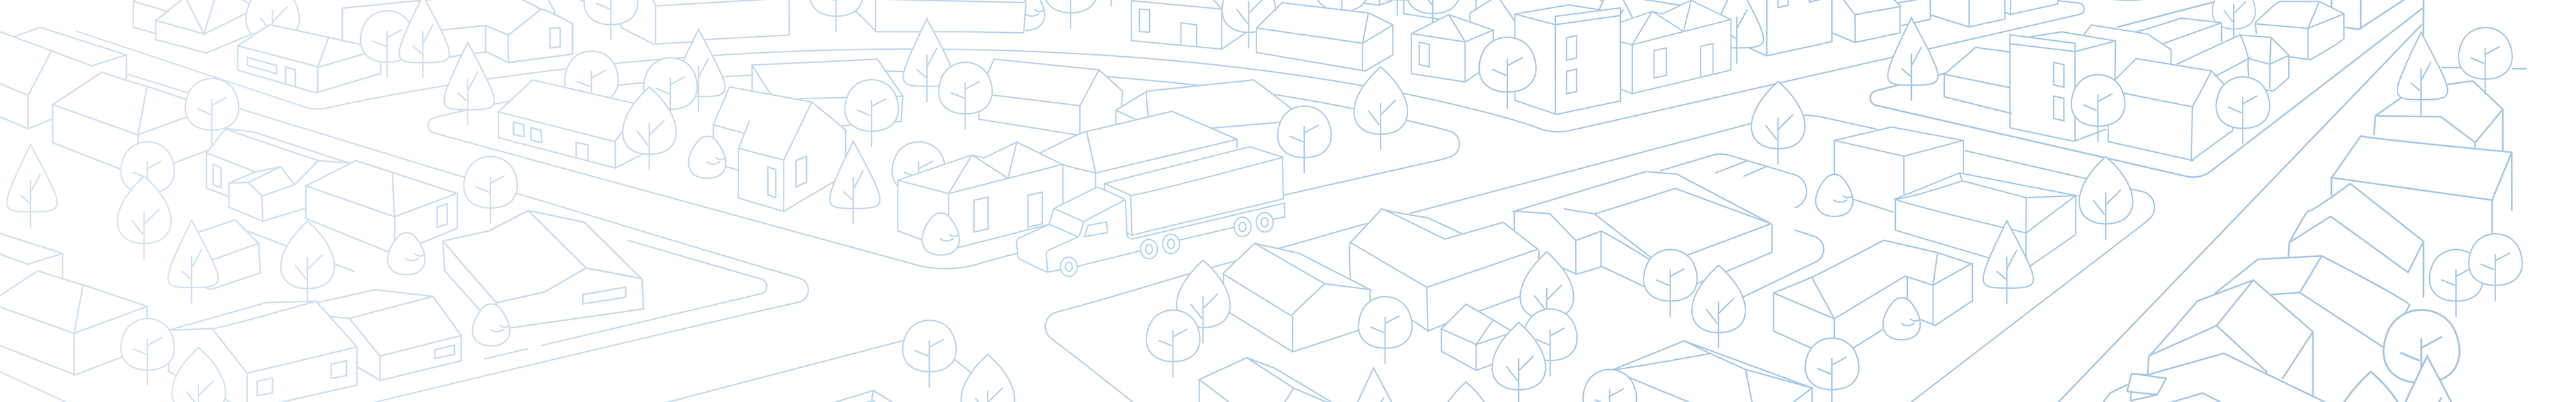 illustration of city with moving truck - United Van Lines®